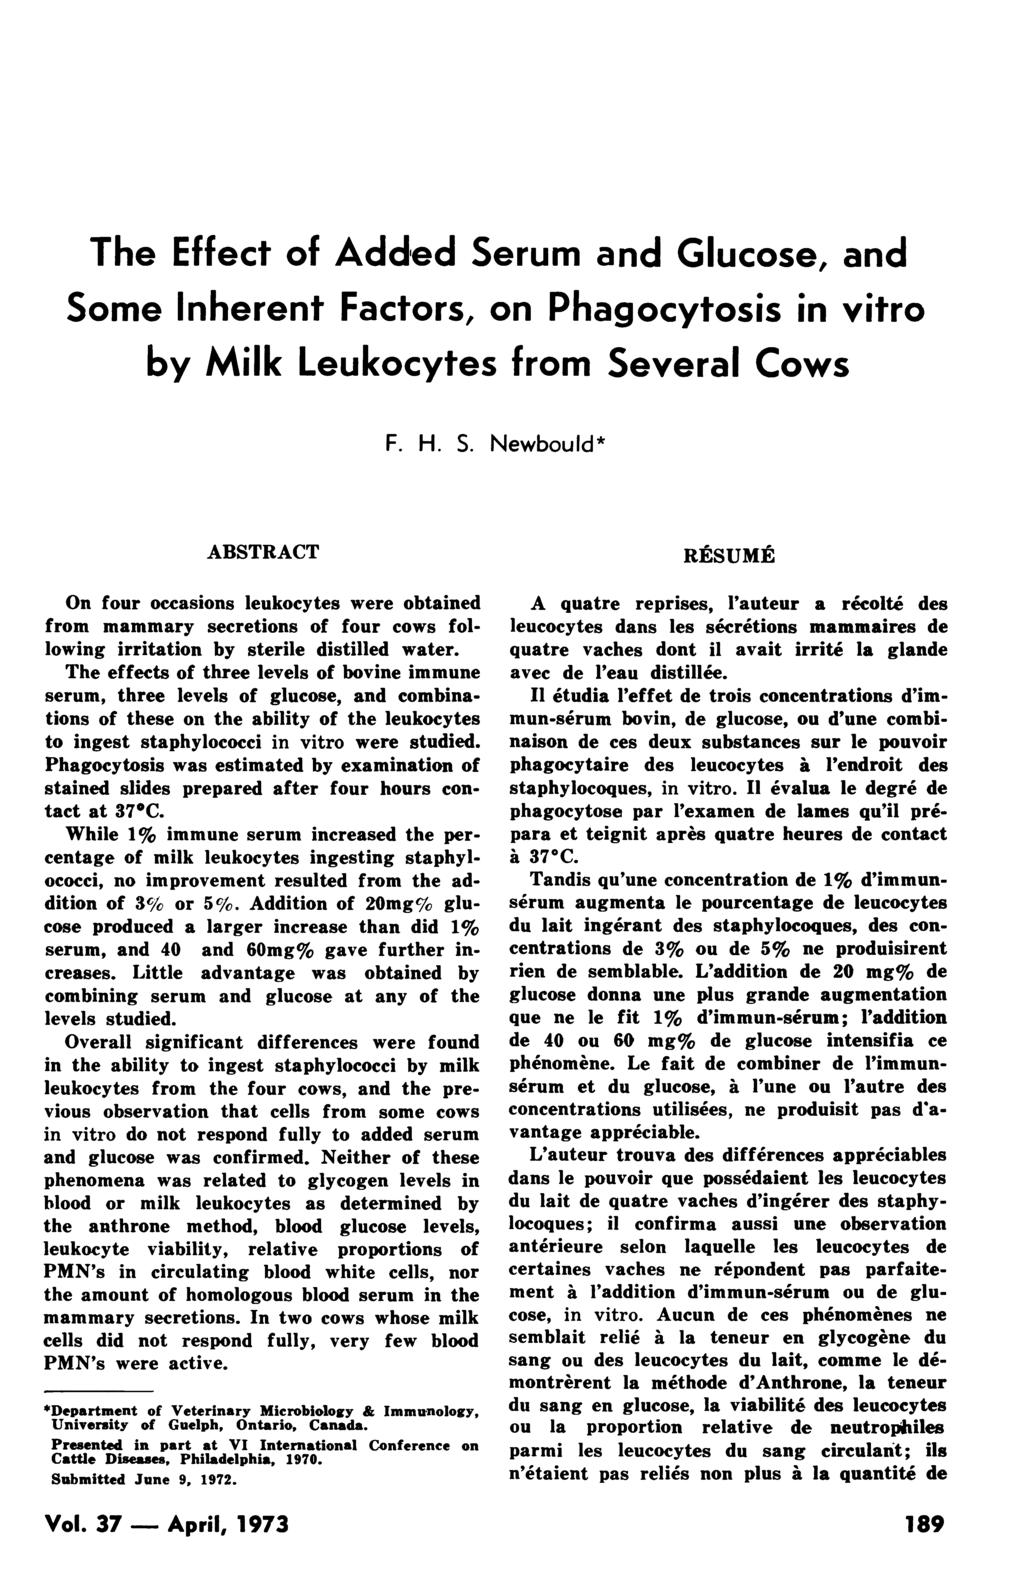 The Effect of Addled Serum and Glucose, and Some Inherent Factors, on Phagocytosis in vitro by Milk Leukocytes from Several Cows F. H. S. Newbould* ABSTRACT On four occasions leukocytes were obtained from mammary secretions of four cows following irritation by sterile distilled water.